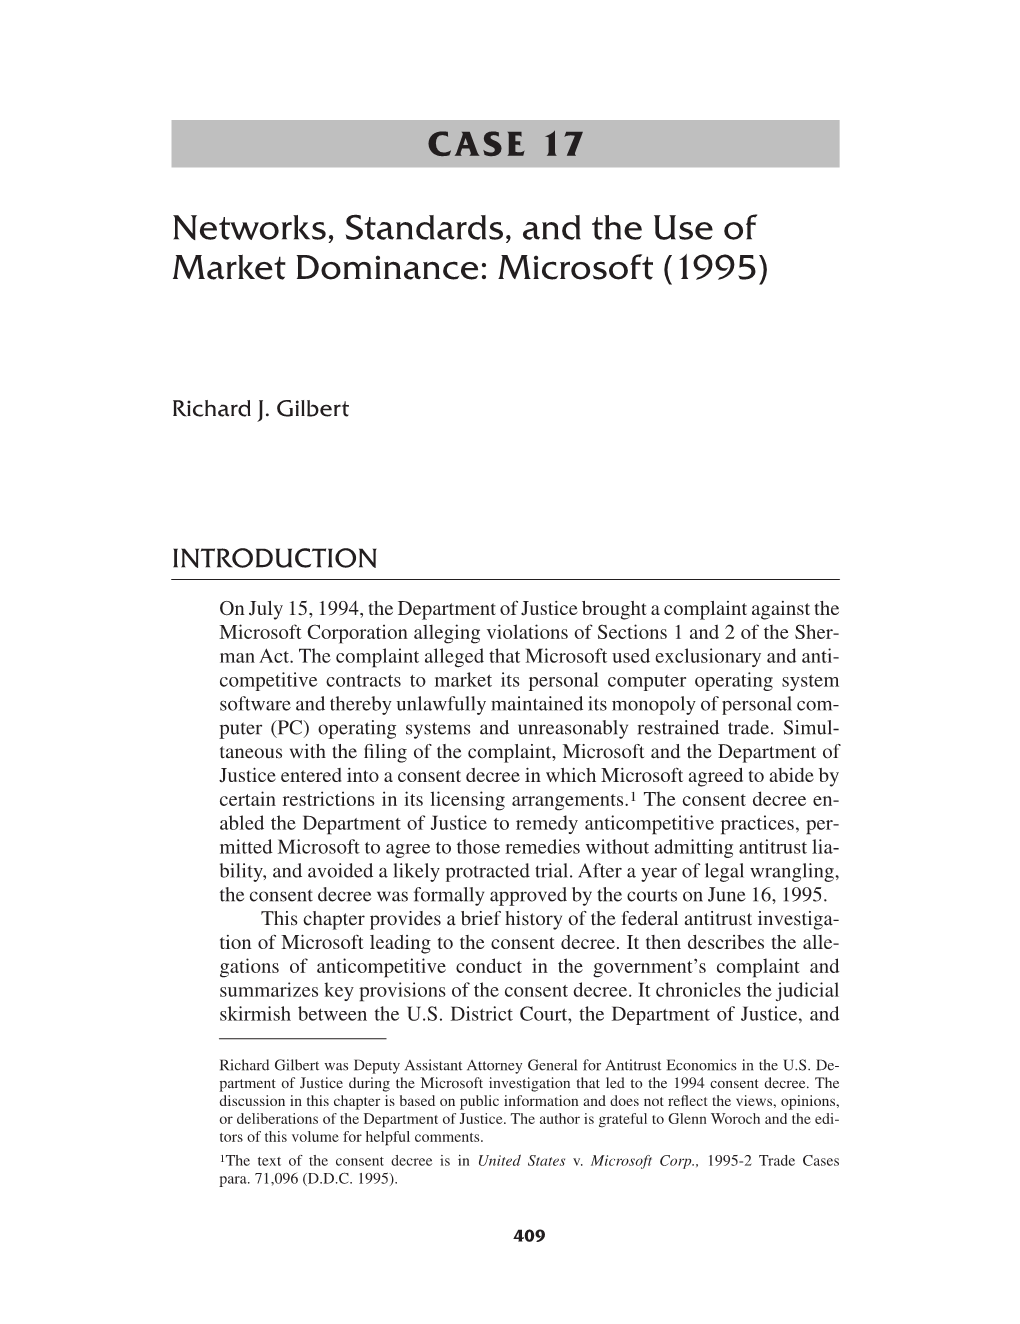 CASE 17 Networks, Standards, and the Use of Market Dominance